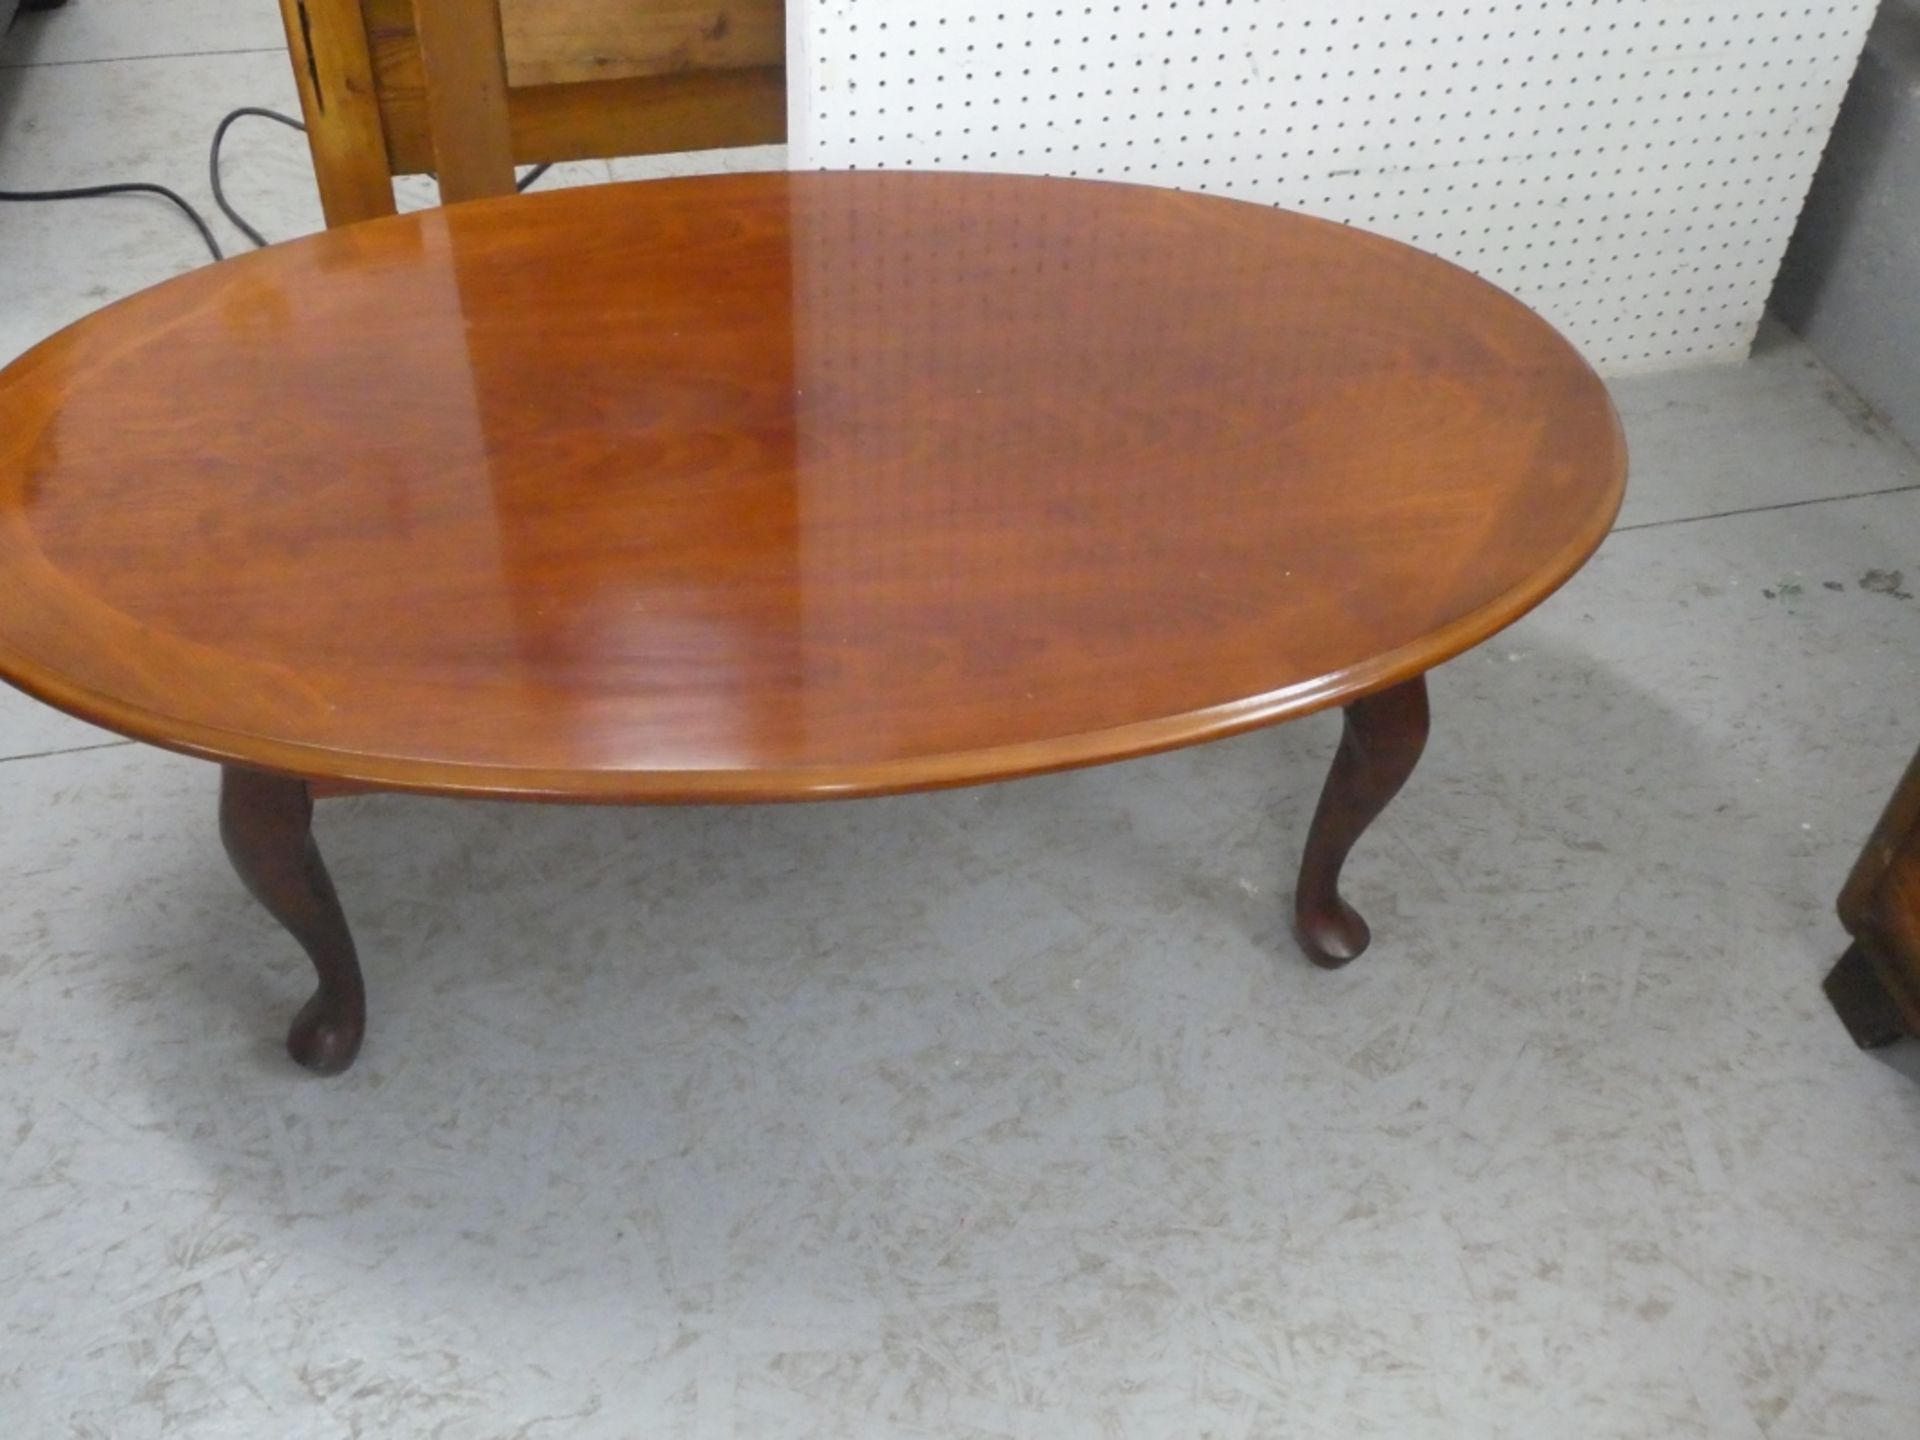 MCM OVAL COFFEE TABLE 16.5"H 43"W 27"D